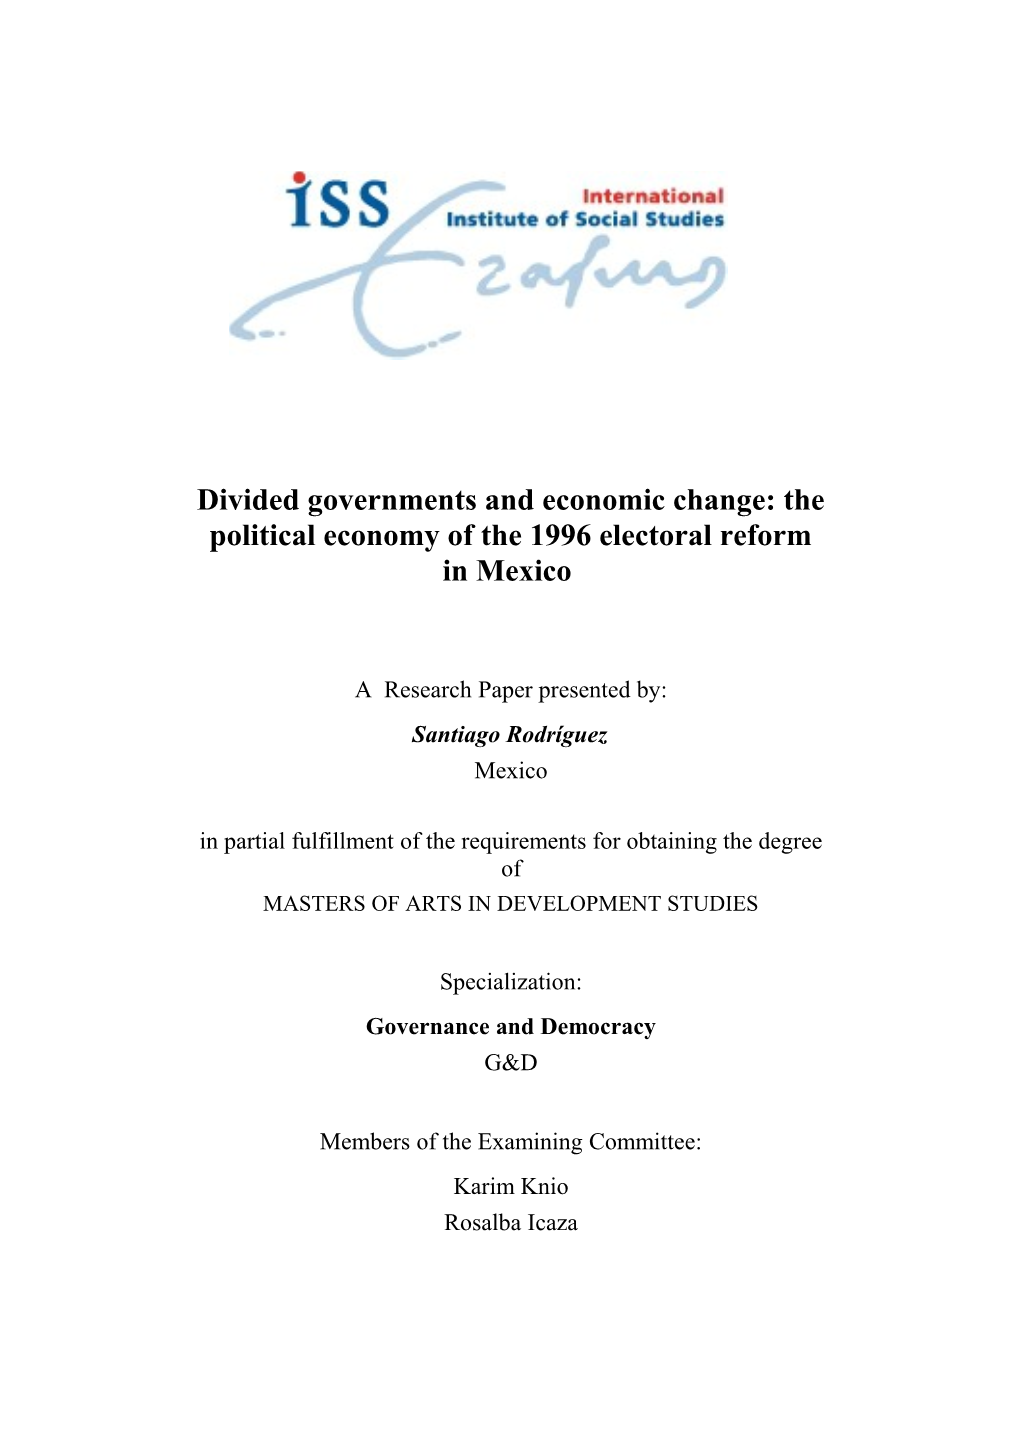 Divided Governments and Economic Change: the Political Economy of the 1996 Electoral Reform